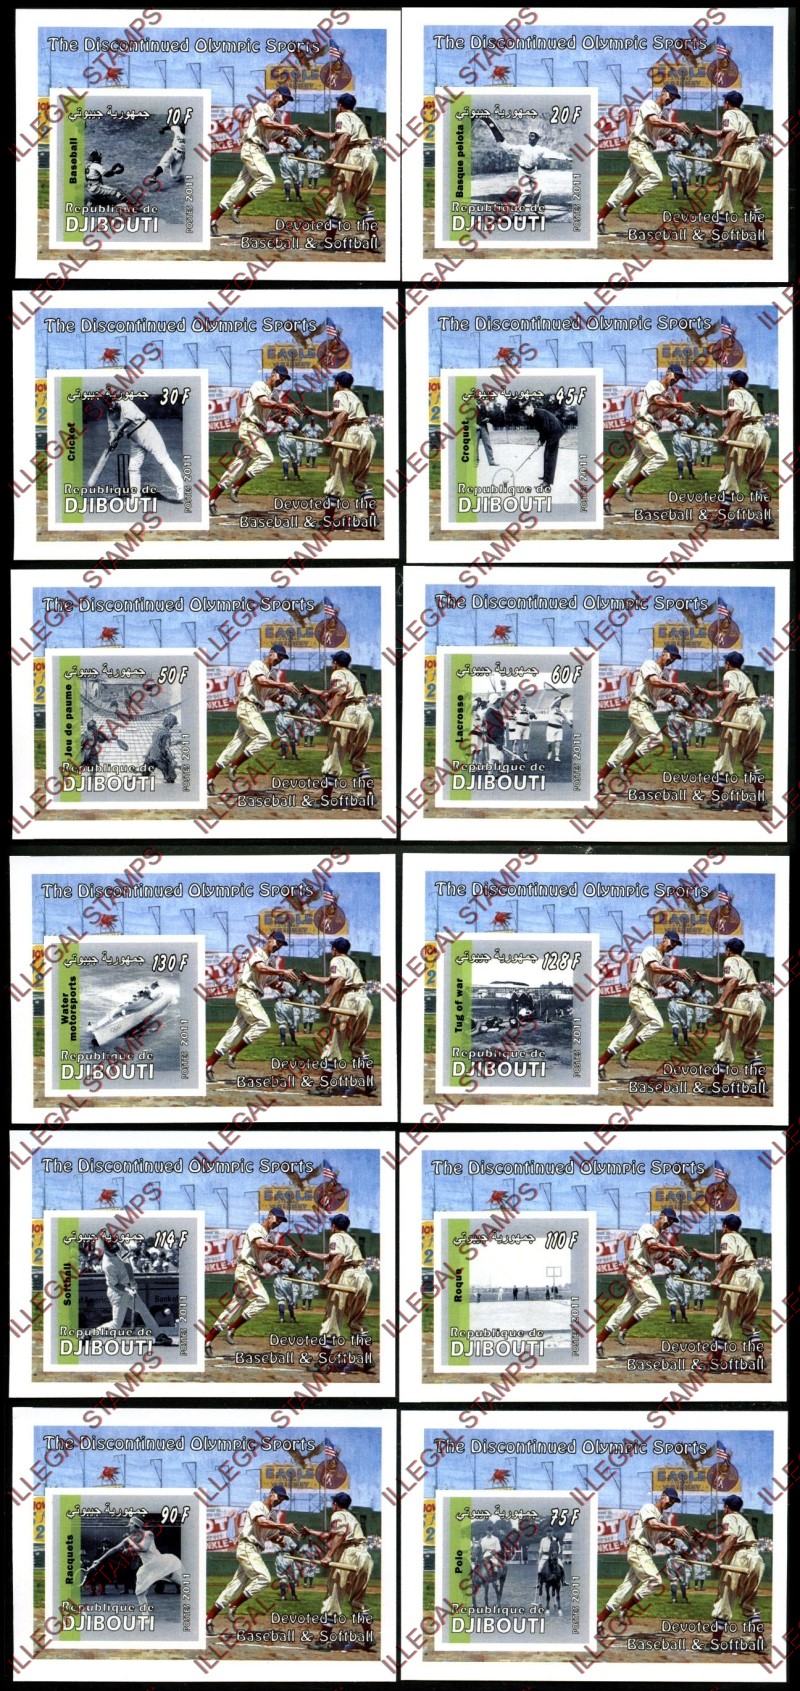 Djibouti 2011 Discontinued Olympic Sports Illegal Stamp Souvenir Sheets of 1